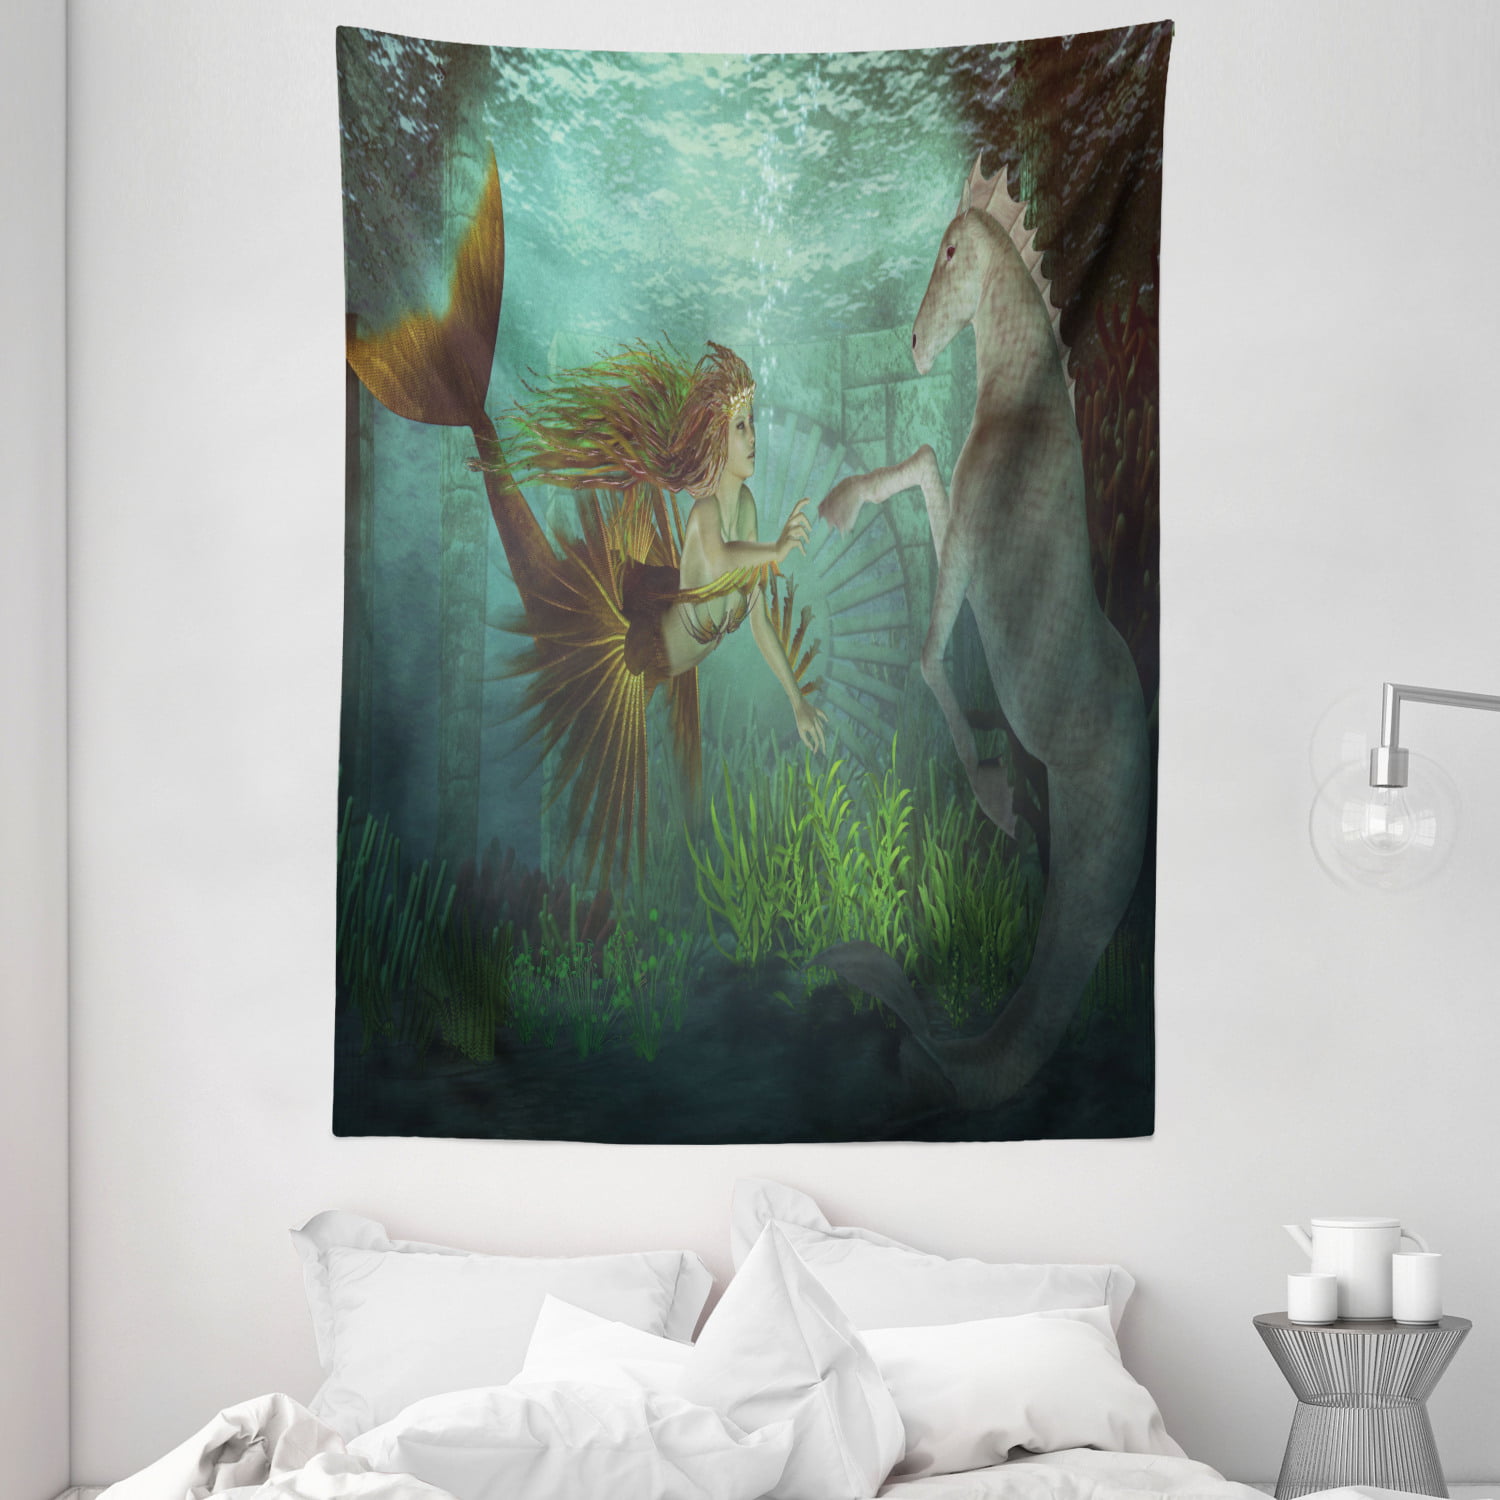 Mermaid and Ocean wave Tapestry Hippie Wall Hanging for Living Room Bedroom Dorm 